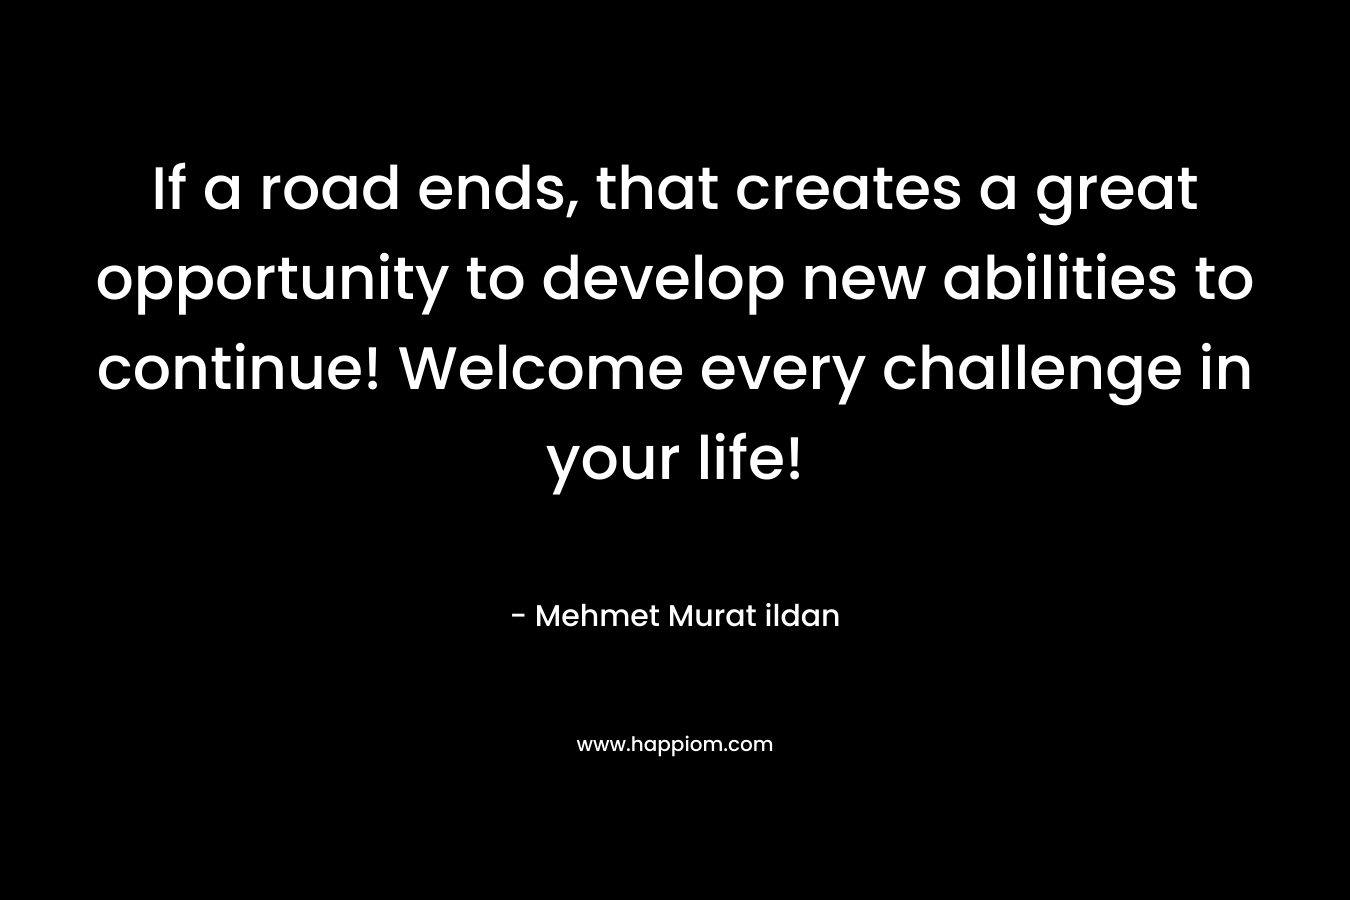 If a road ends, that creates a great opportunity to develop new abilities to continue! Welcome every challenge in your life! – Mehmet Murat ildan